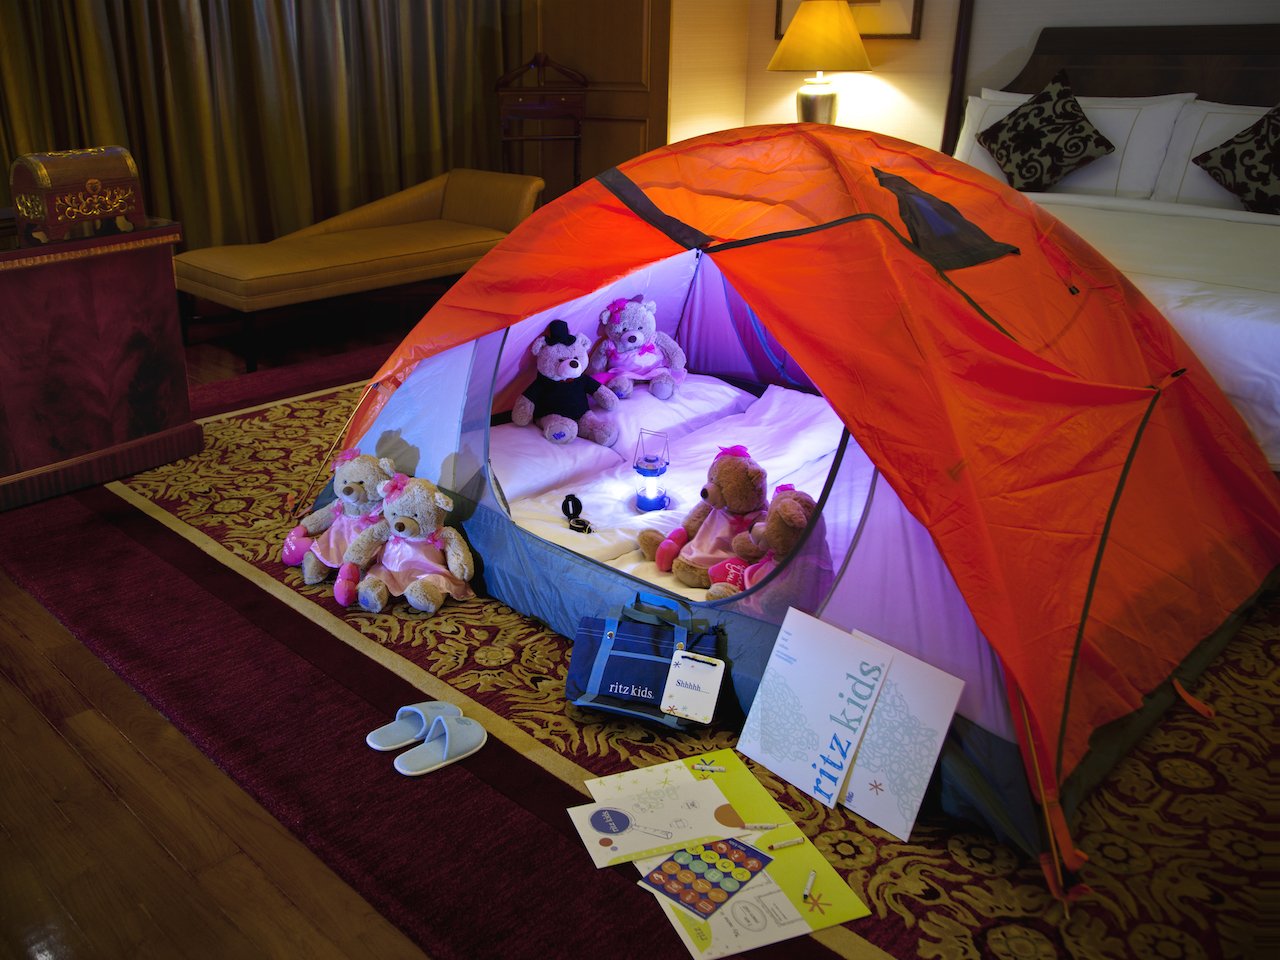 tent set up in hotel room with toys and flashlight